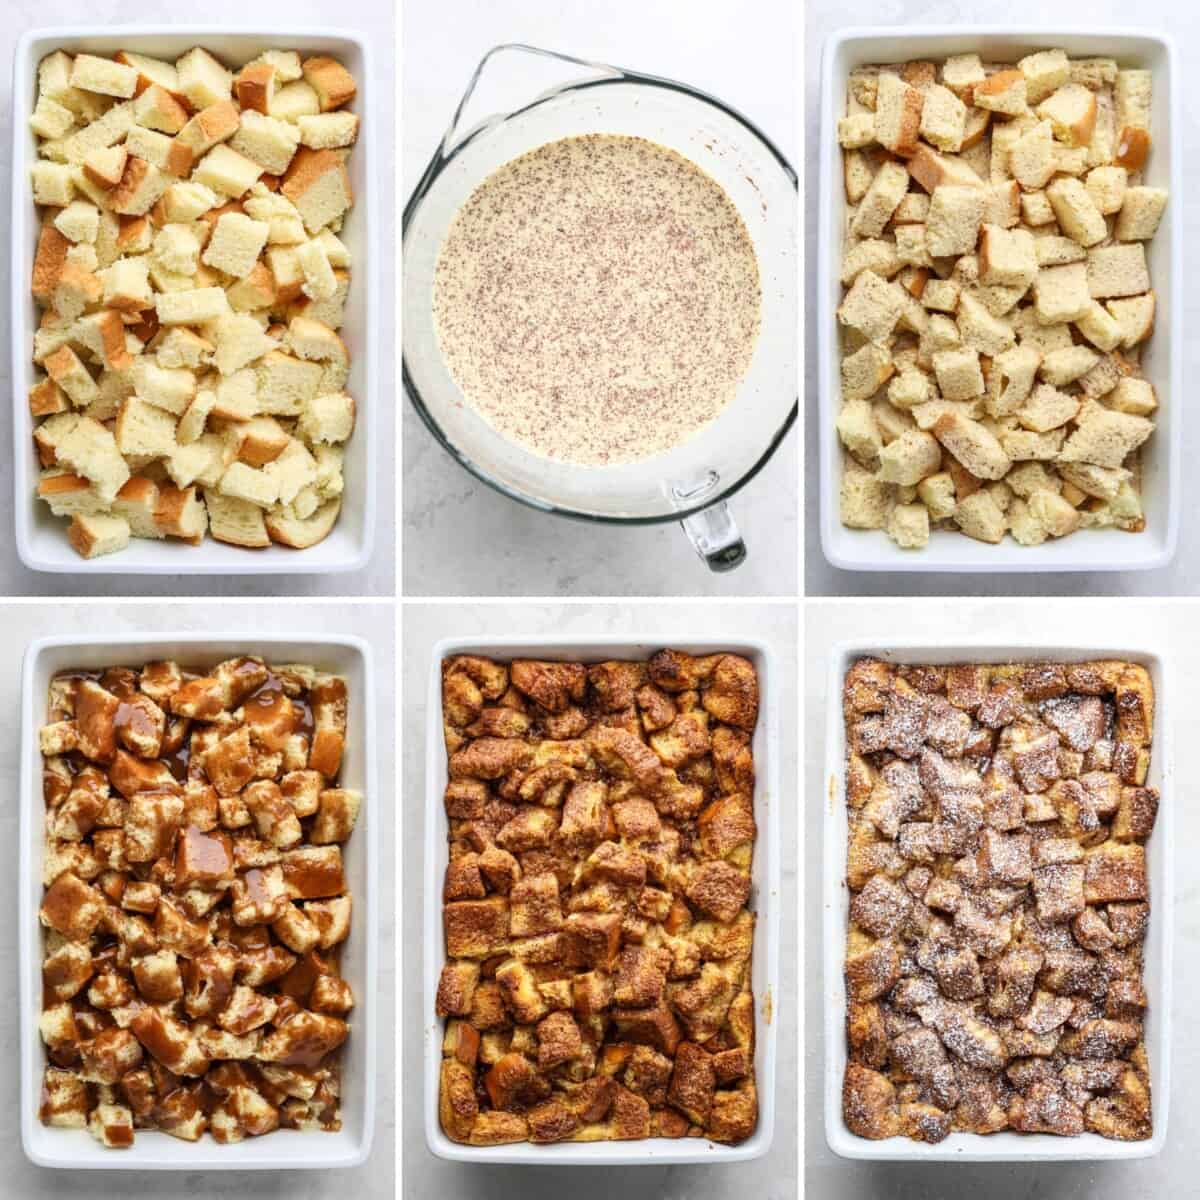 A collage of six images to show the process of how to make French toast casserole from start to finish.